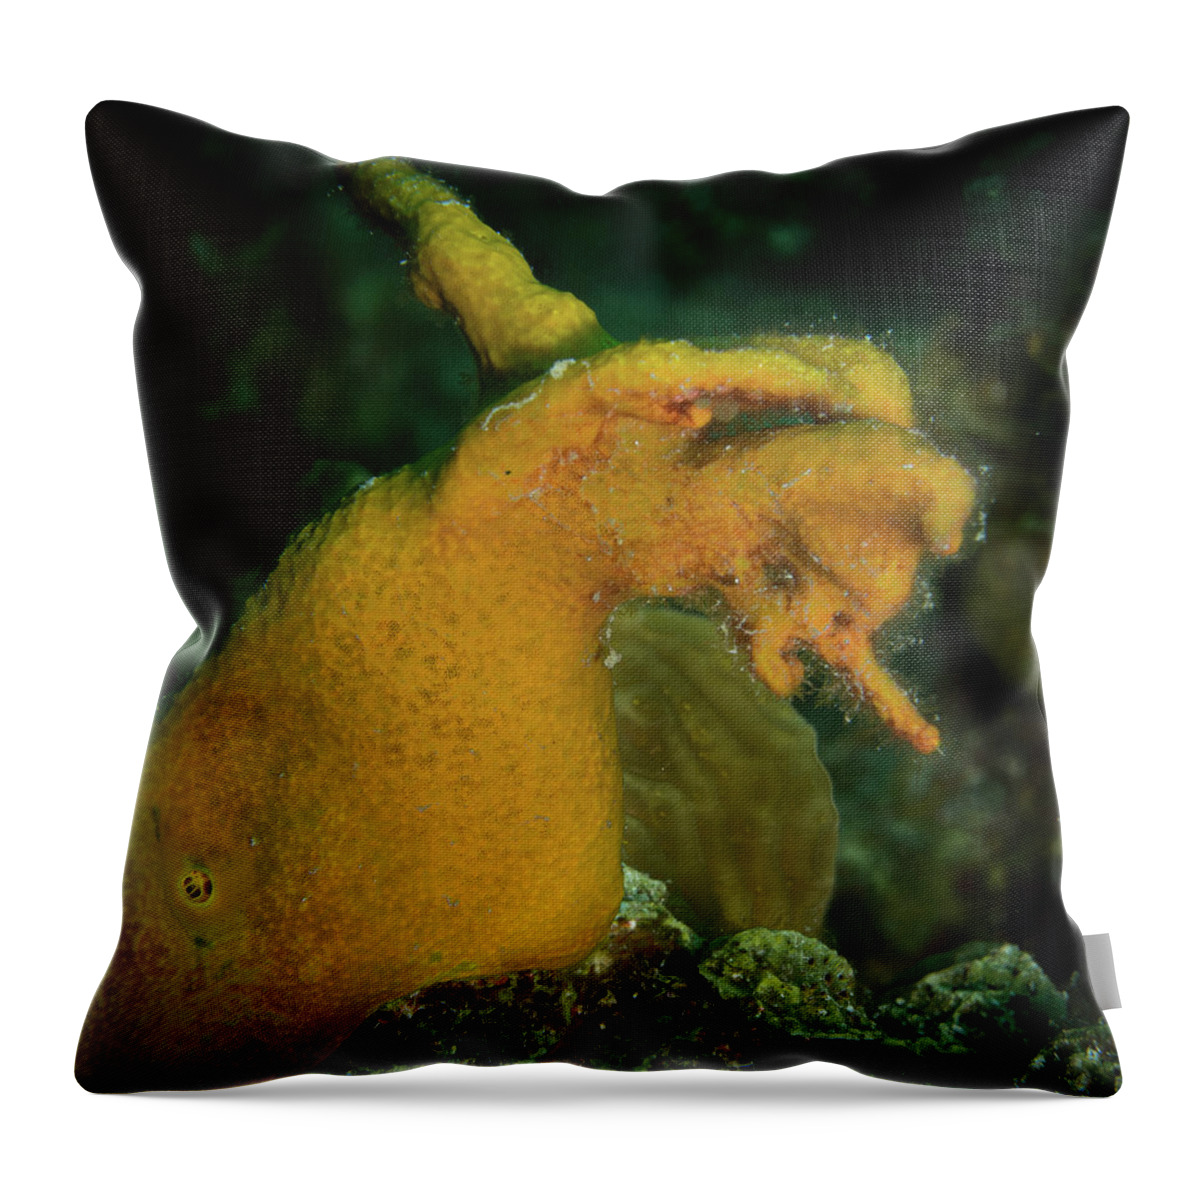 Angry Yellow Sponge Throw Pillow featuring the photograph Angry Yellow Sponge by Jean Noren